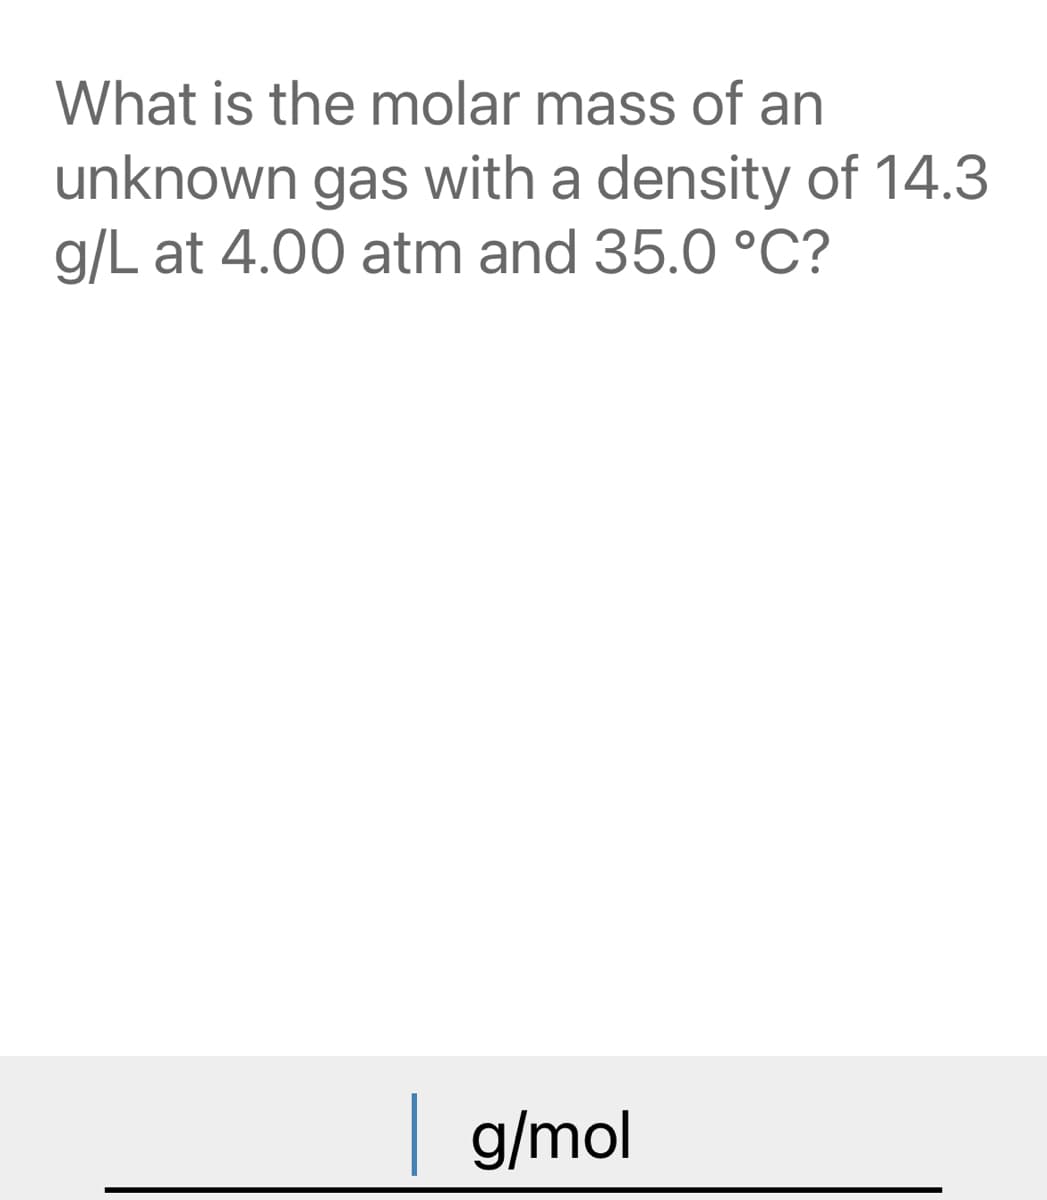 What is the molar mass of an
unknown gas with a density of 14.3
g/L at 4.00 atm and 35.0 °C?
| g/mol
